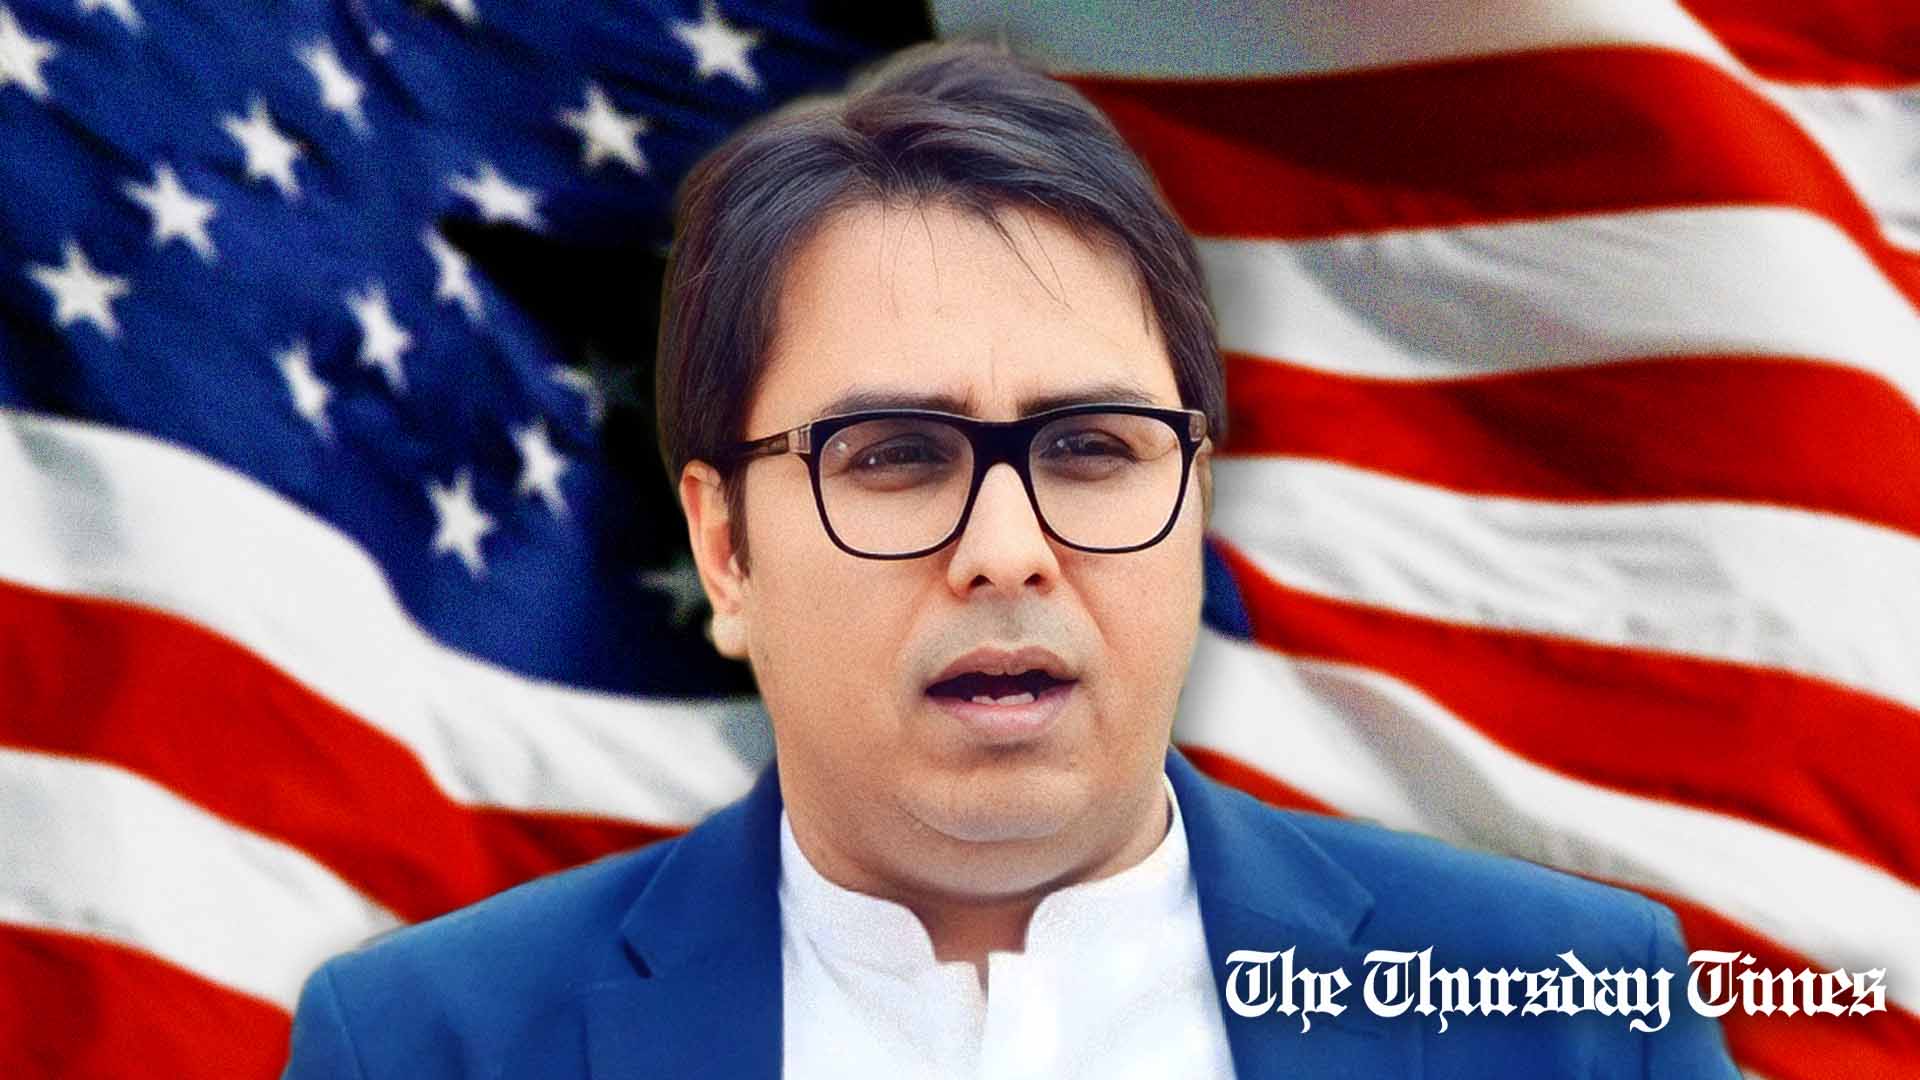 A file photo is shown of senior PTI leader Shahbaz Gill against a backdrop of the U.S. flag. — FILE/THE THURSDAY TIMES